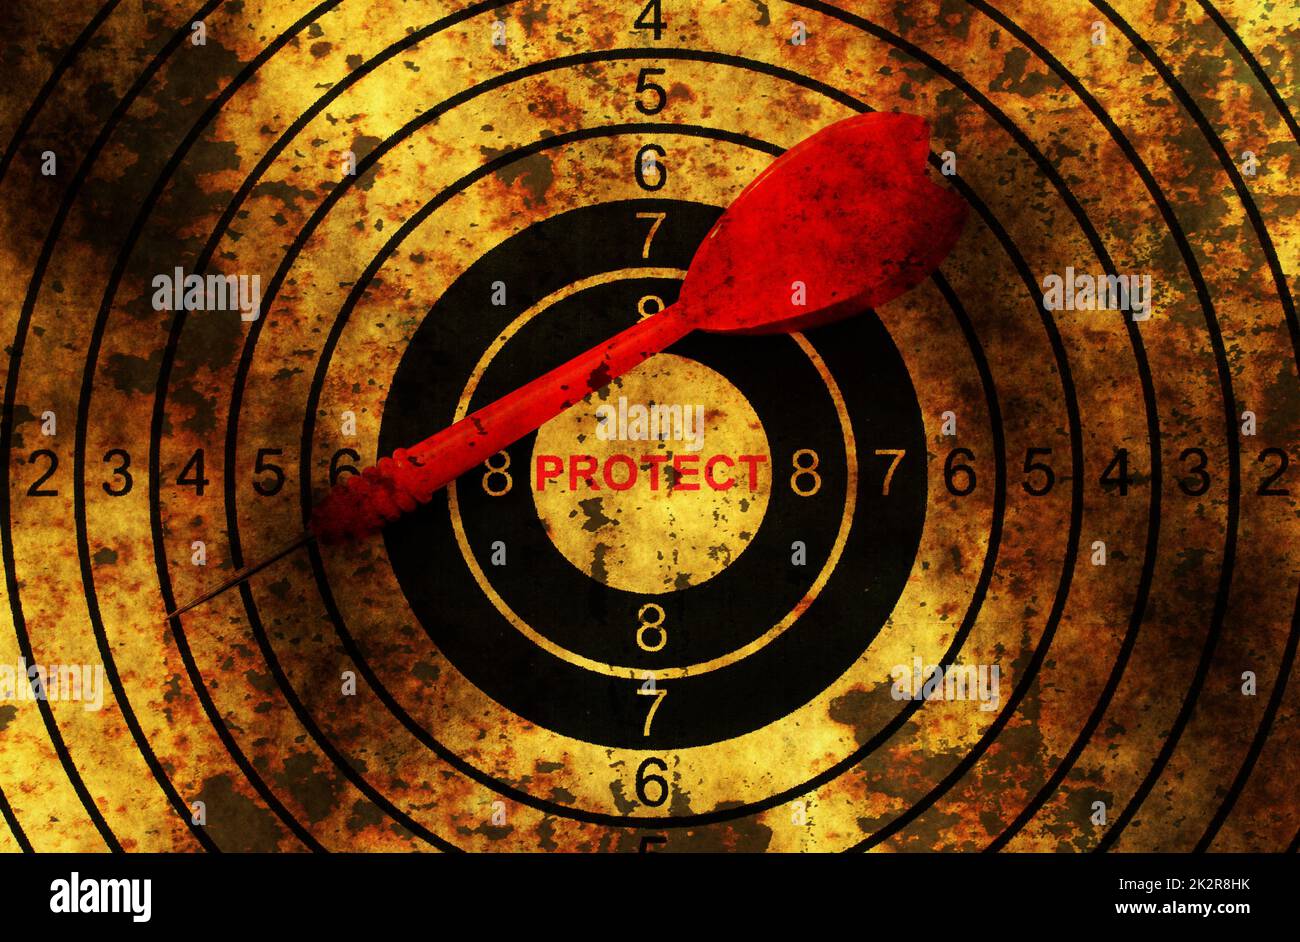 Dart on grunge protect target concept Stock Photo